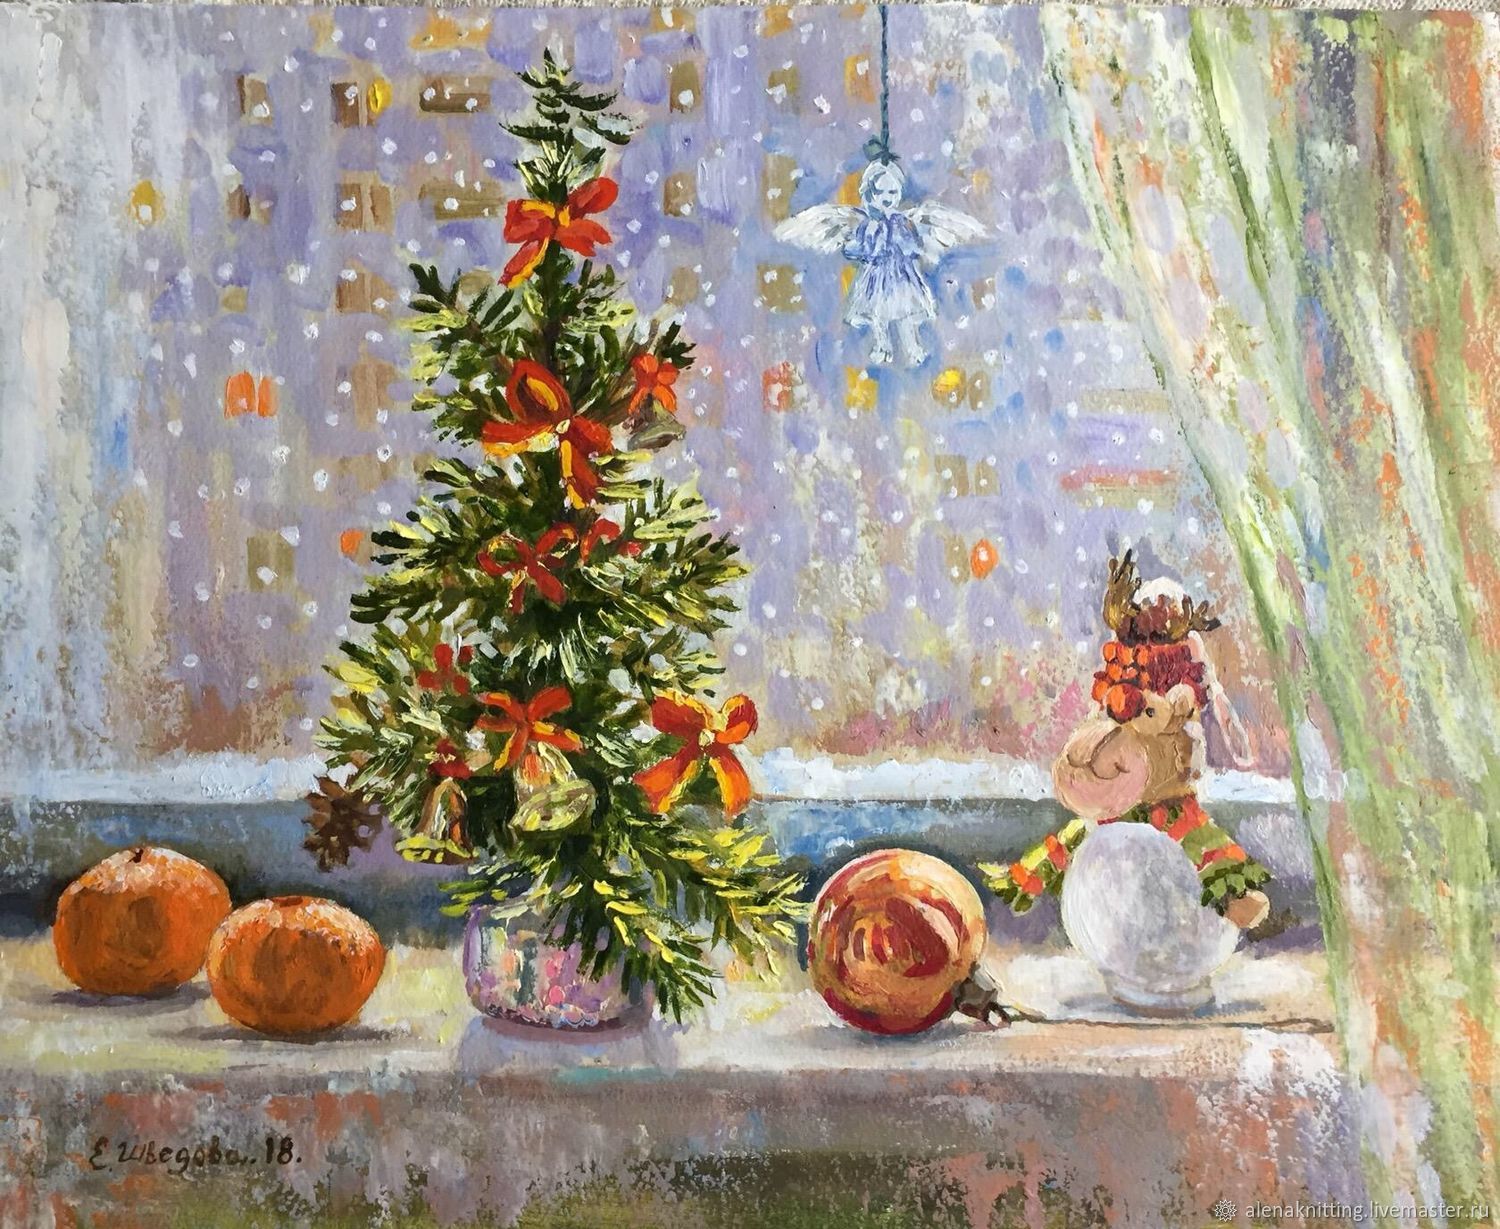 Oil painting 'Children's holiday', Pictures, Moscow,  Фото №1